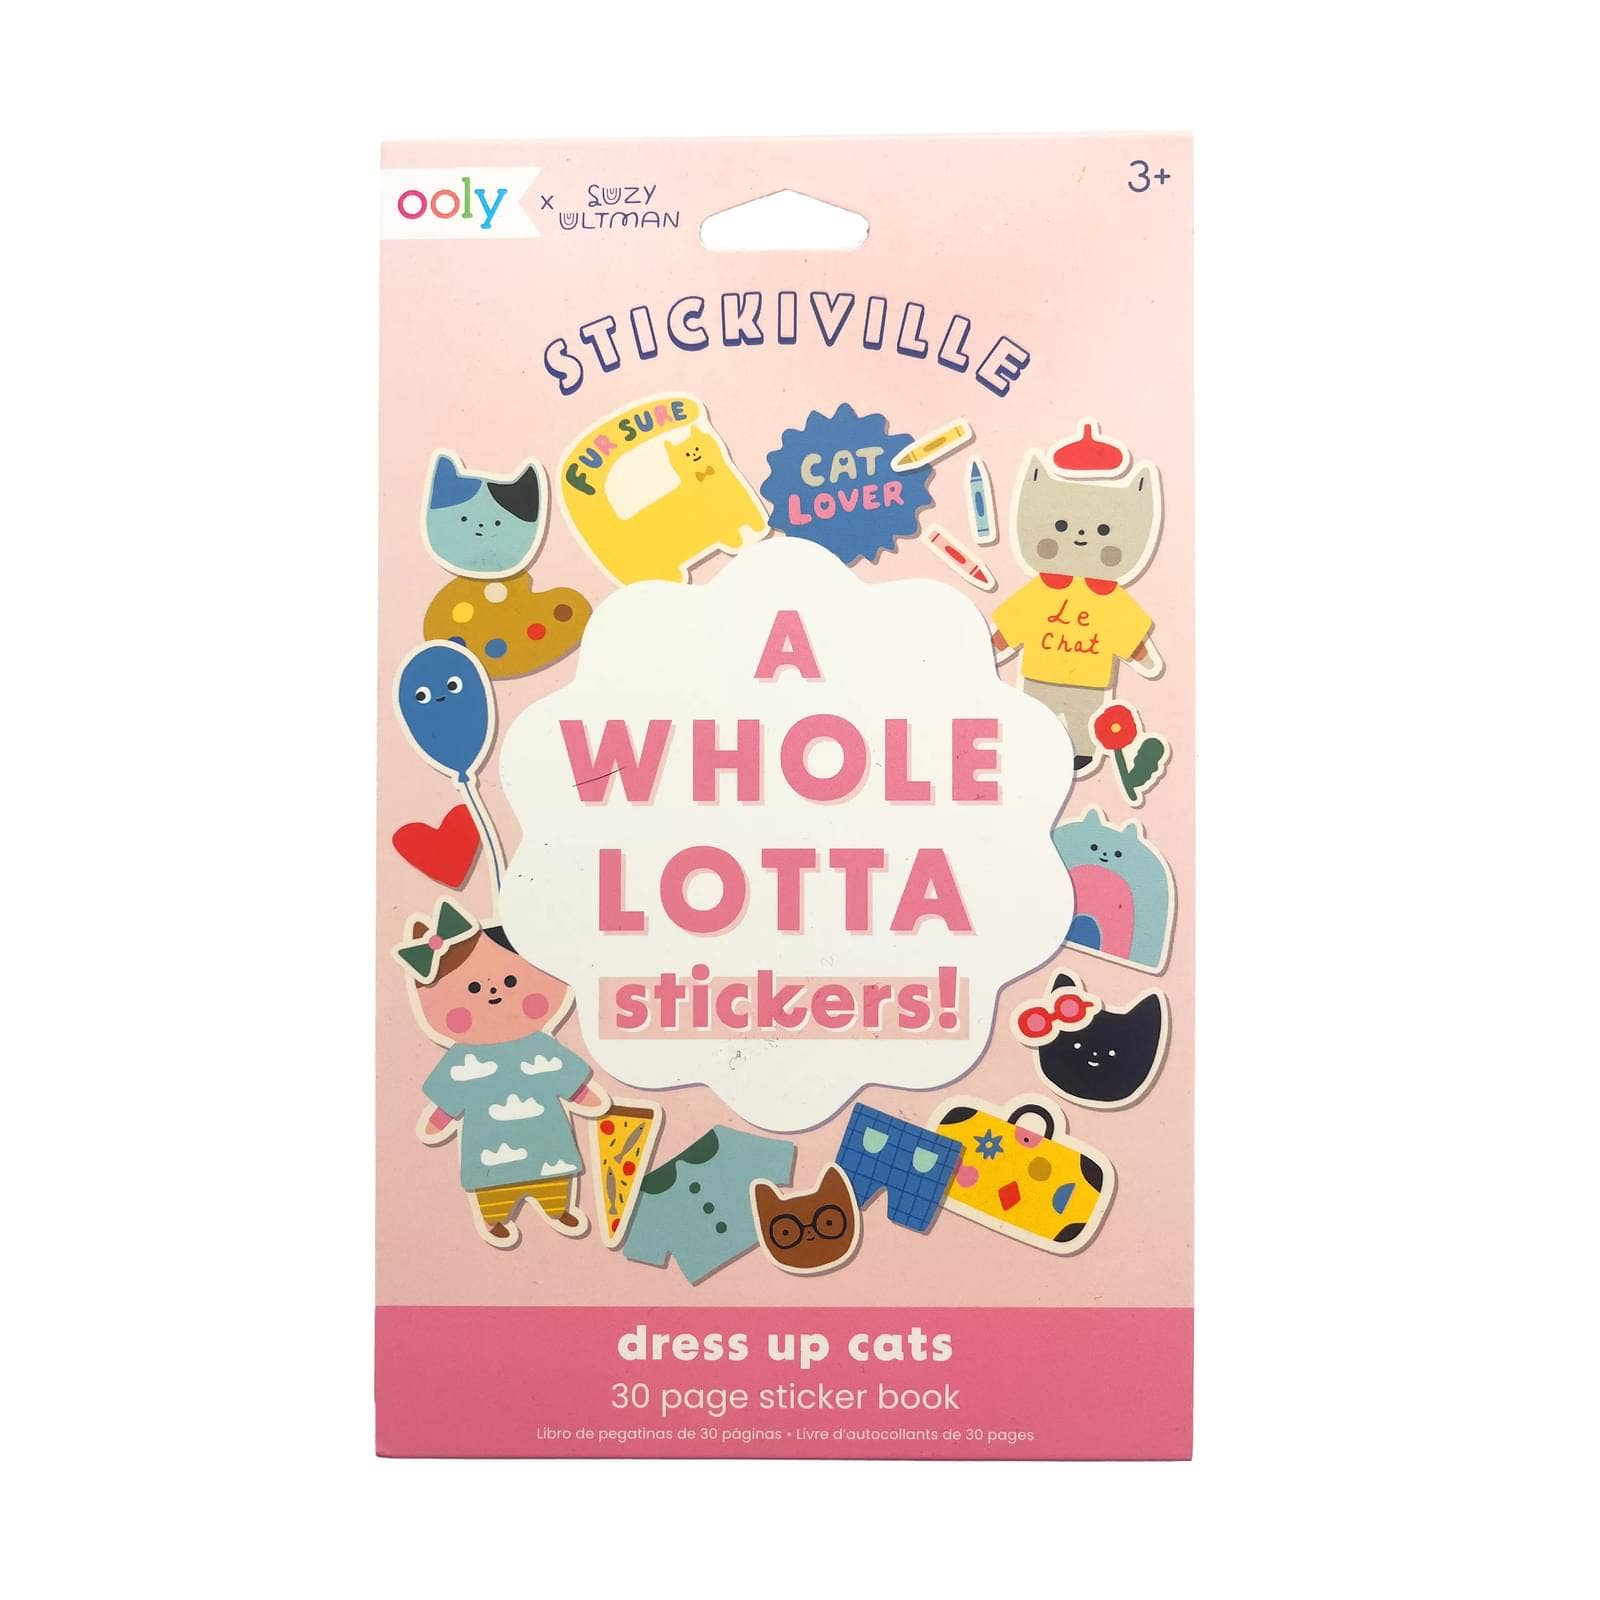 OOLY Stickiville Stickers | Dress up Cats